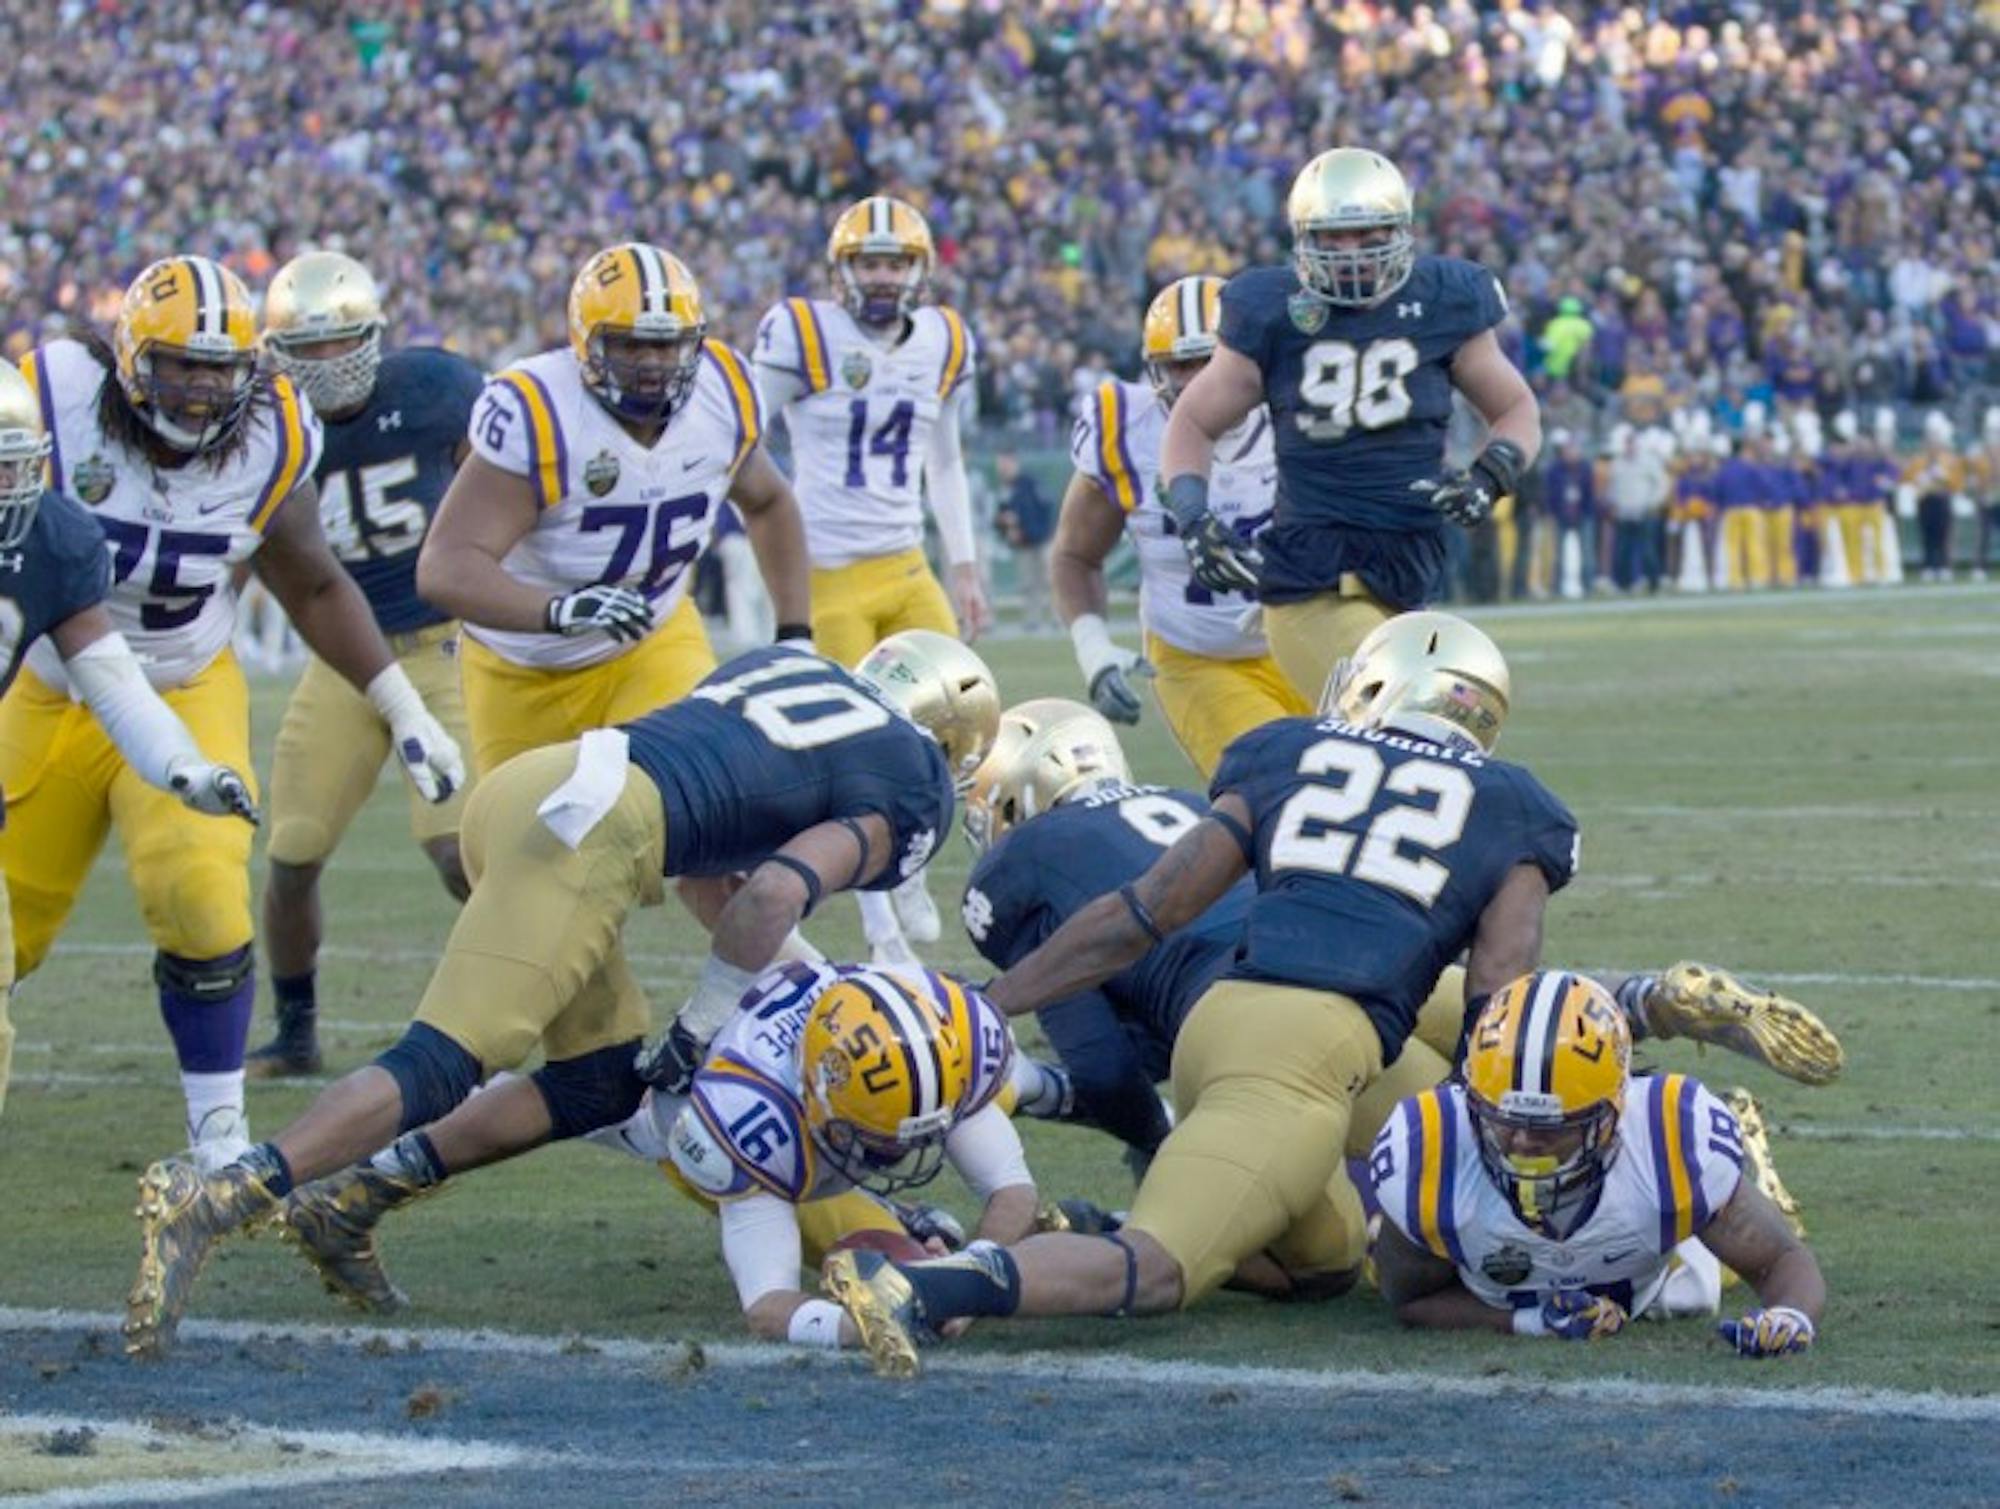 Irish safeties junior Max Redfield, 10, and senior Elijah Shumate, 22, tackle an LSU ballcarrier at the goal line during Notre Dame's 31-28 win in the Music City Bowl on Dec. 30.